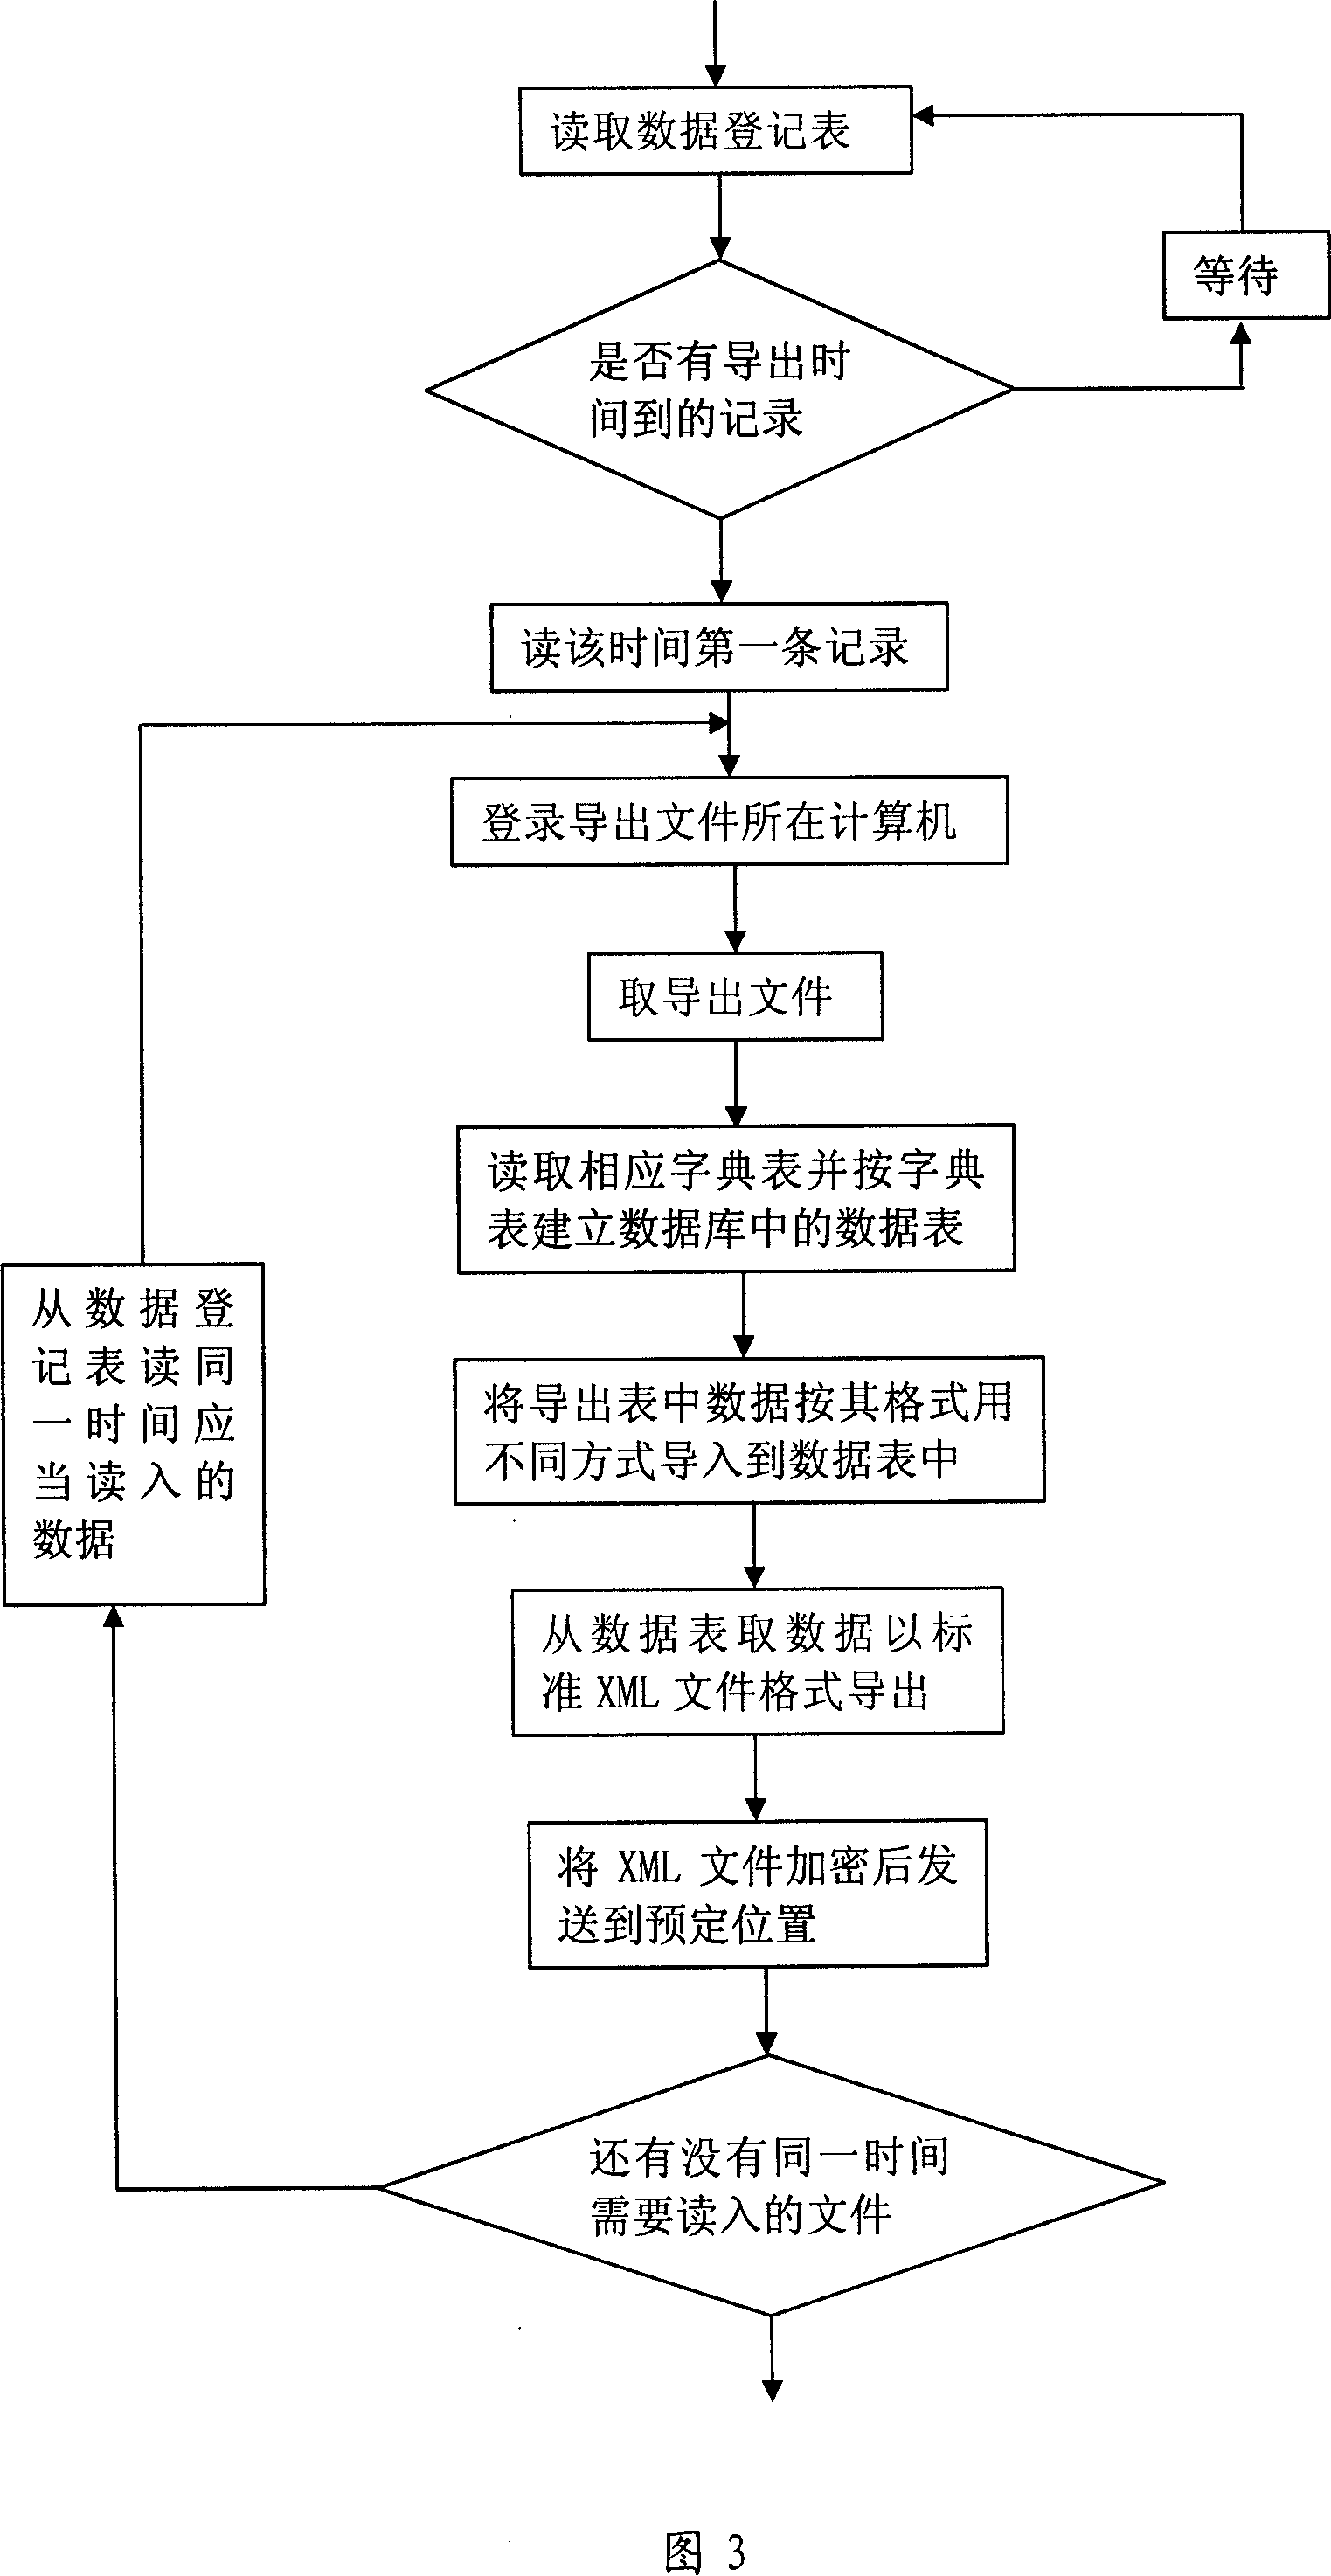 Data integrating method for logic isomeric system in counterpart network